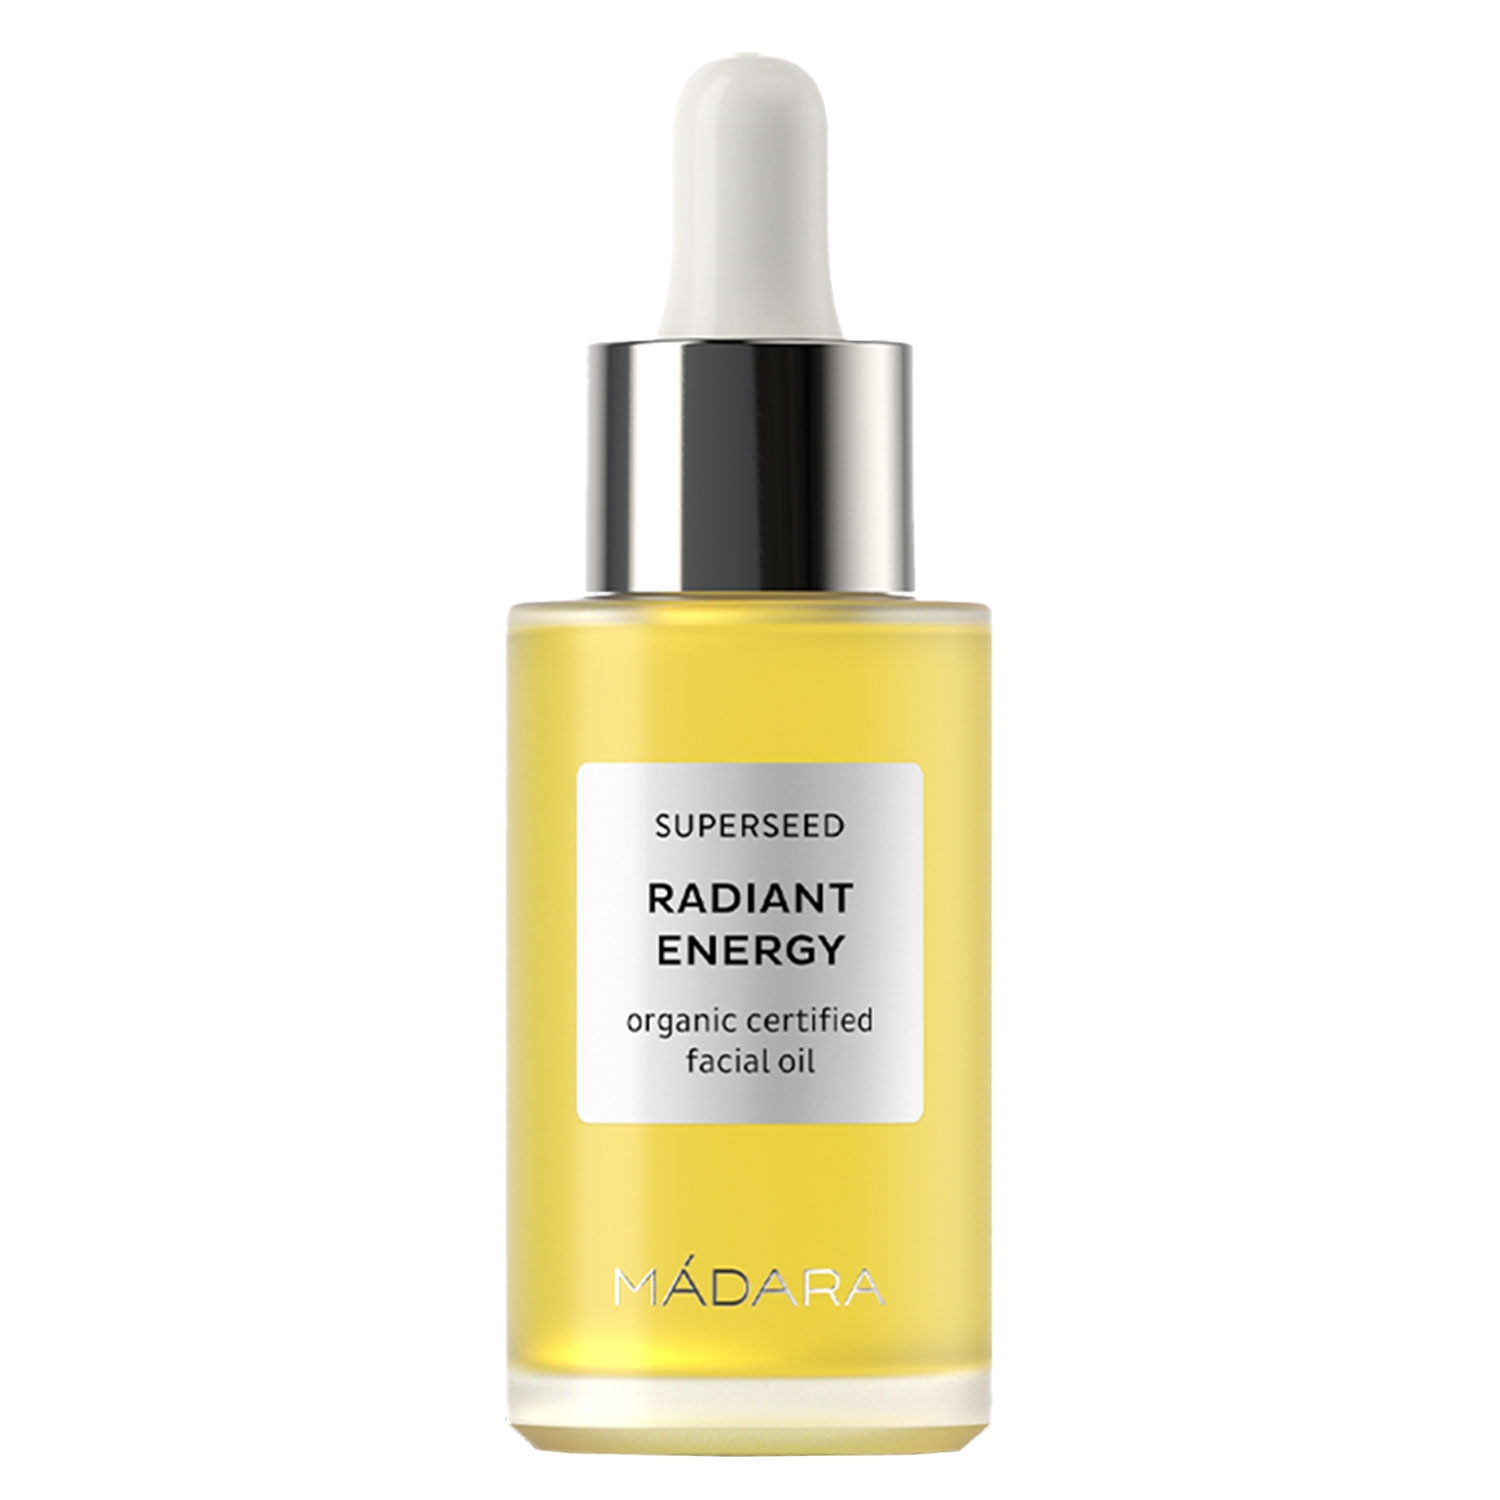 Product image from MÁDARA Care - Superseed Radiant Energy Facial Oil